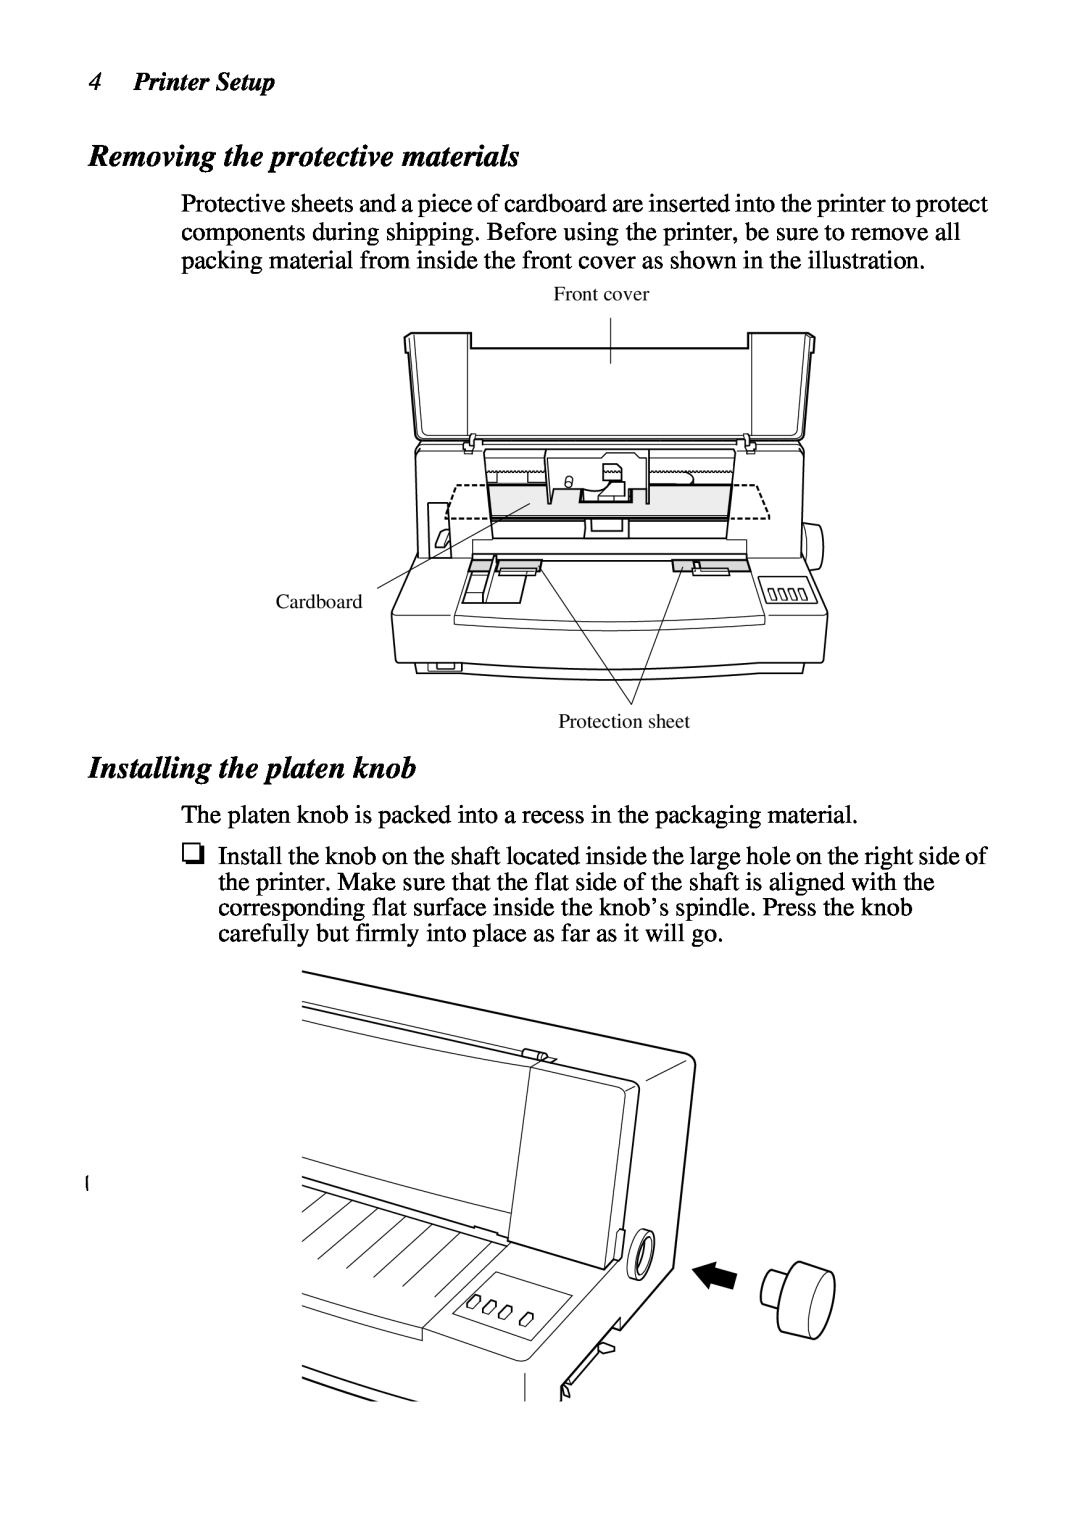 Star Micronics LC-7211 user manual Removing the protective materials, Installing the platen knob, Printer Setup 